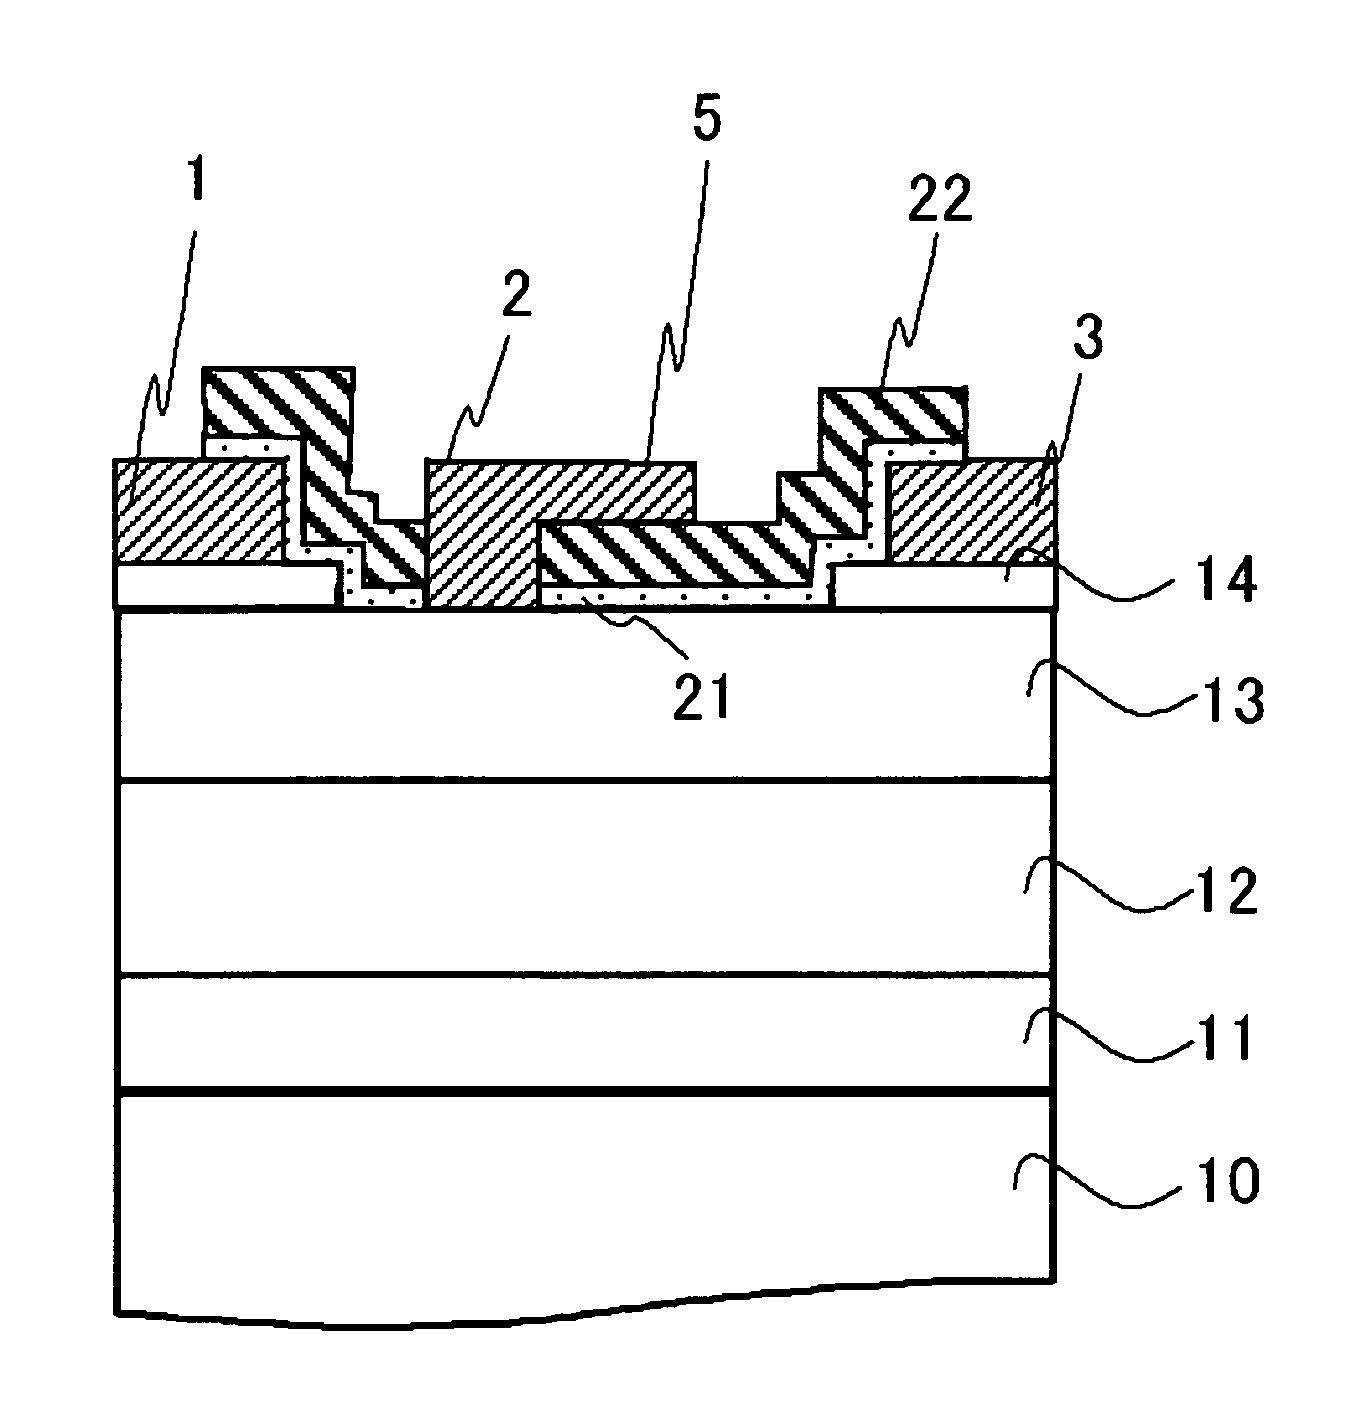 Field-effect transistor having group III nitride electrode structure